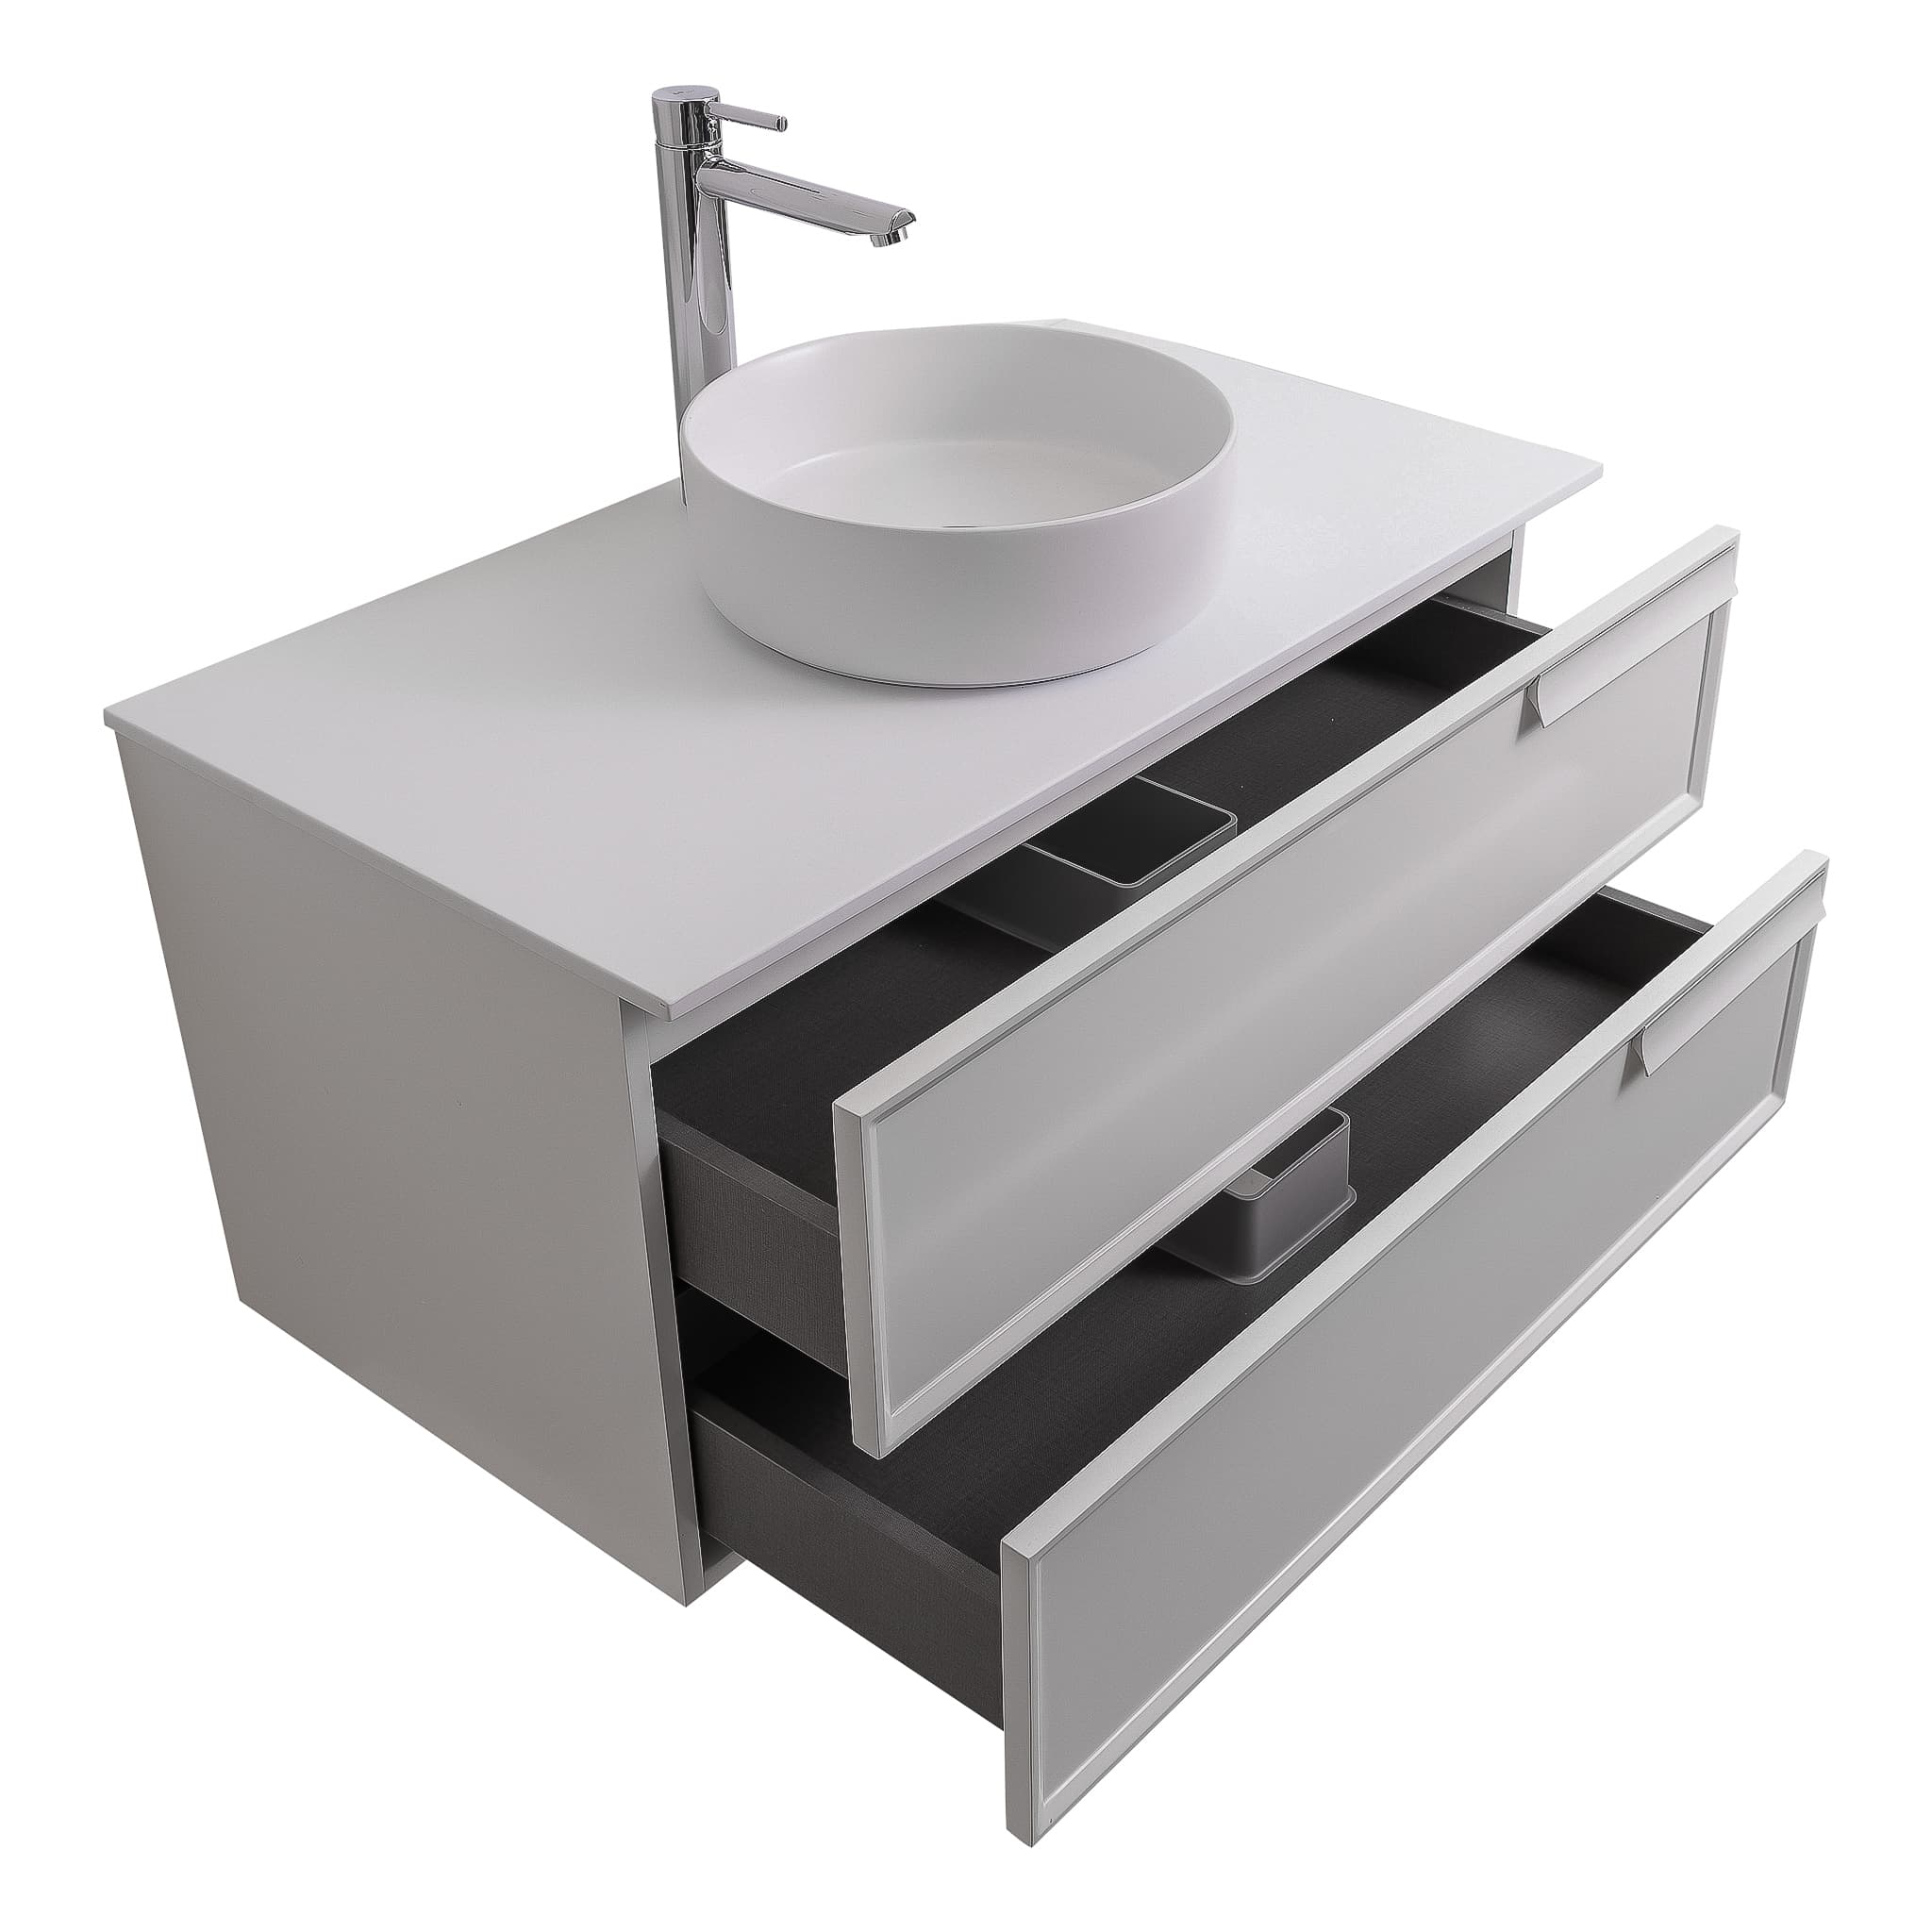 Garda 31.5 Matte White Cabinet, Ares White Top and Ares White Ceramic Basin, Wall Mounted Modern Vanity Set